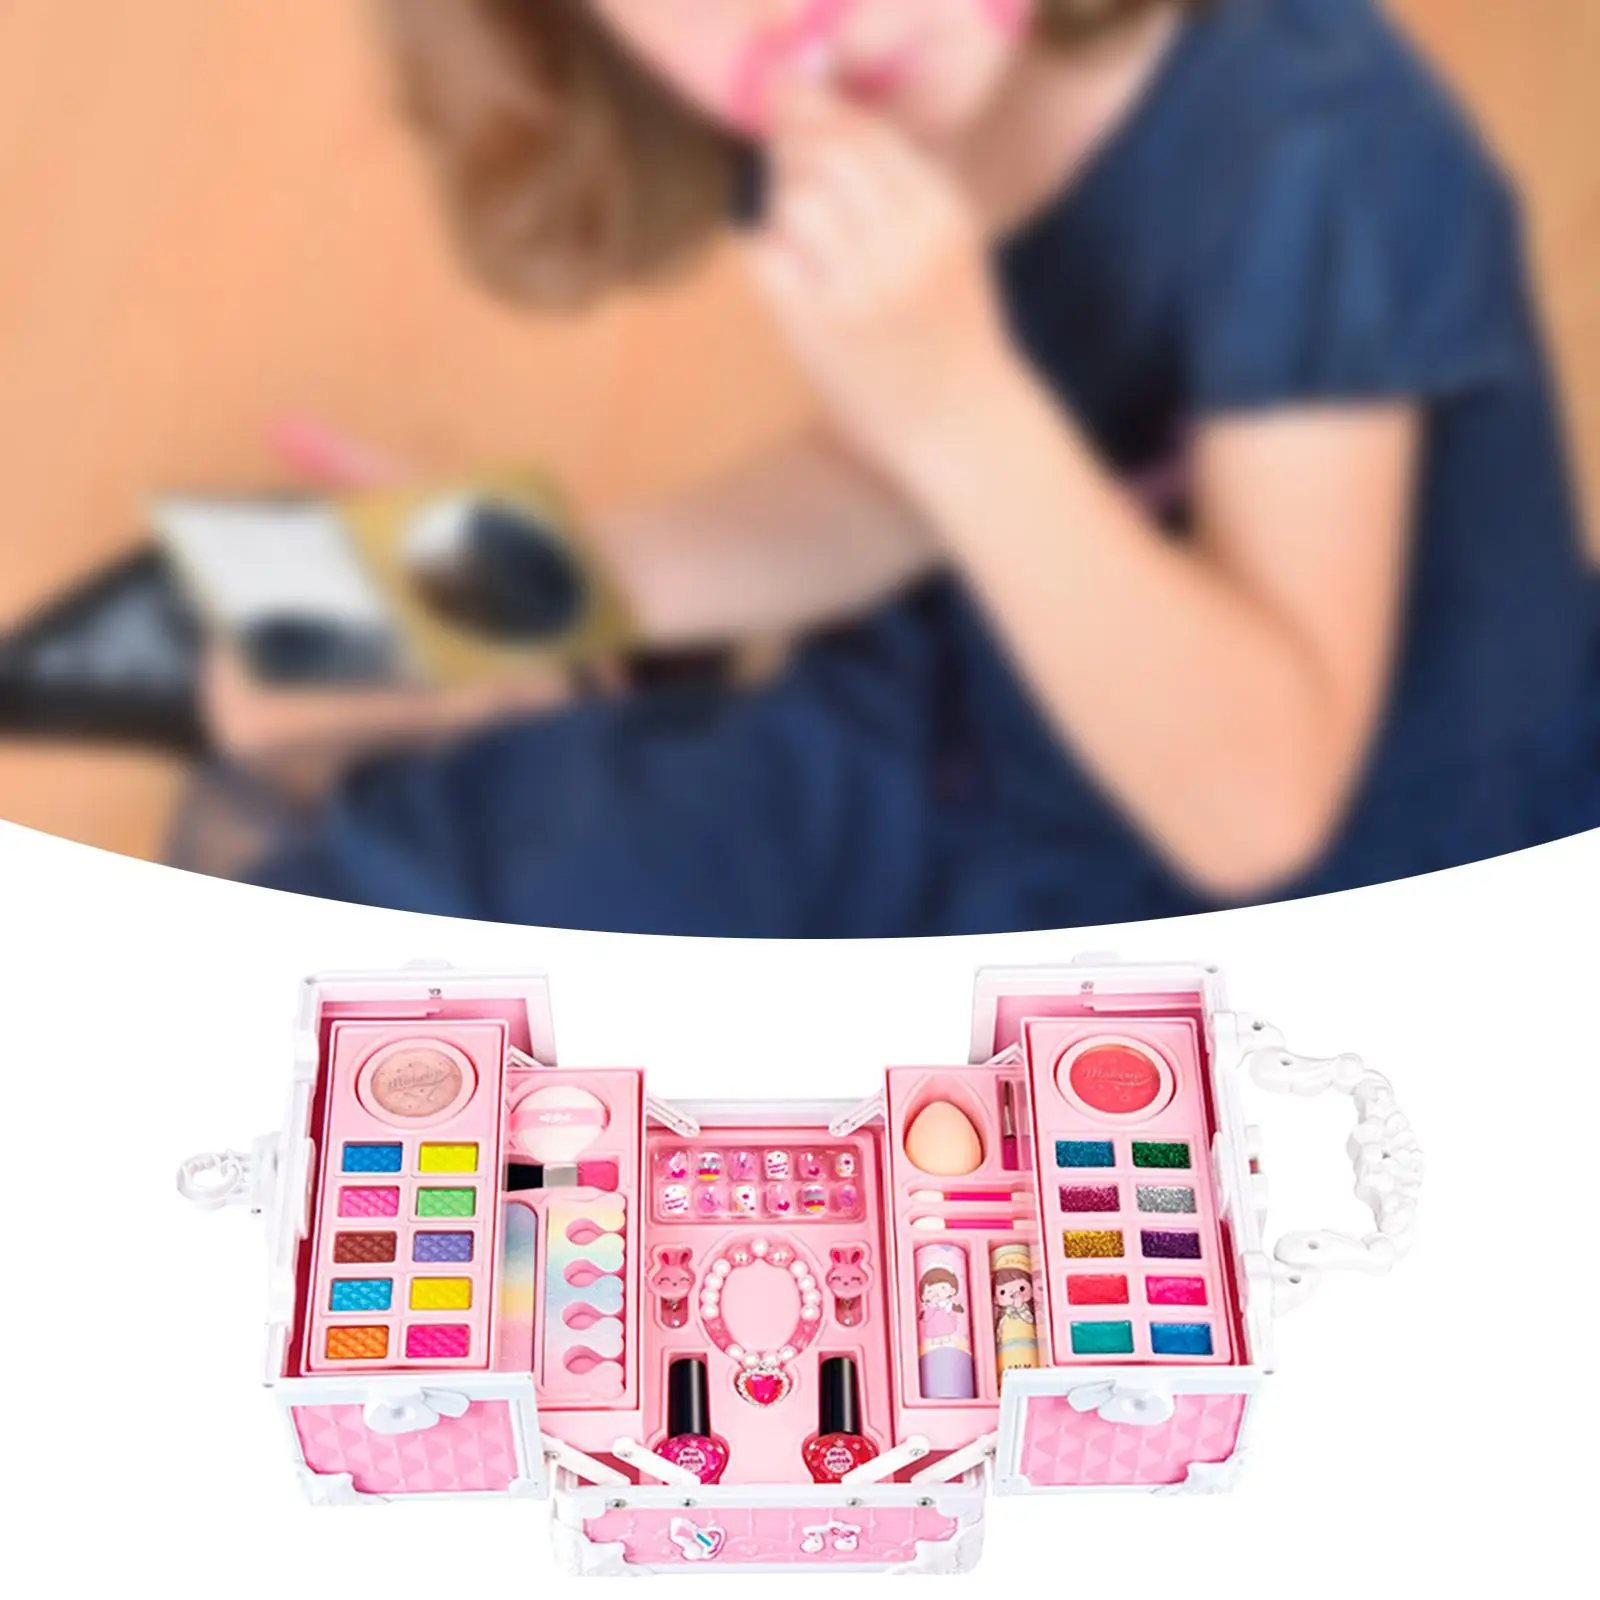 Pretend Play Makeup Beauty Set Role Play Games Kids Washable Makeup Girls Toys Kids Makeup Kits for Toddlers Princess Dress up